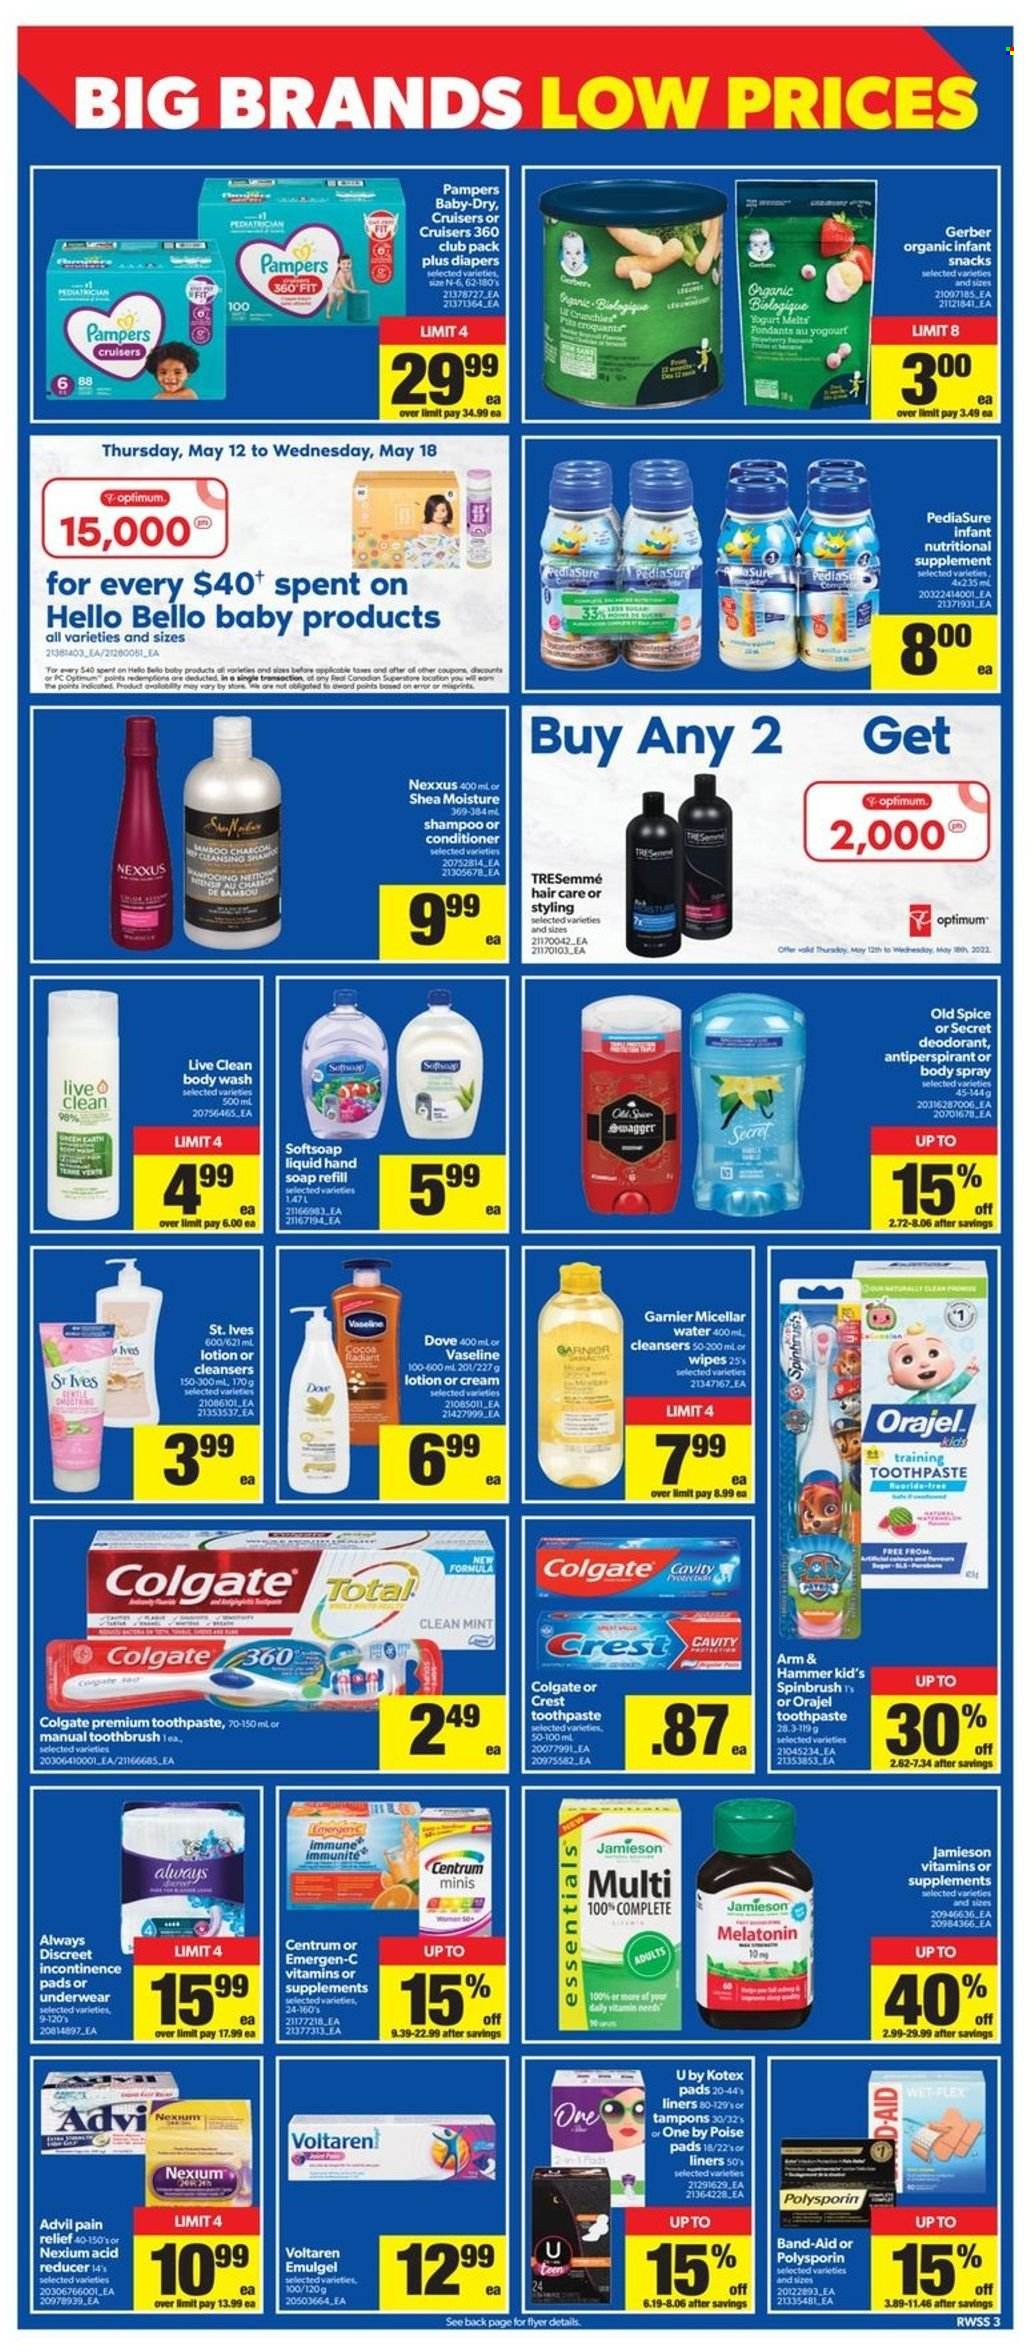 thumbnail - Real Canadian Superstore Flyer - May 12, 2022 - May 18, 2022 - Sales products - snack, Gerber, ARM & HAMMER, spice, wipes, nappies, body wash, Softsoap, hand soap, Vaseline, soap, toothbrush, toothpaste, Crest, Always Discreet, Kotex, Kotex pads, tampons, micellar water, conditioner, TRESemmé, Nexxus, body lotion, body spray, anti-perspirant, Optimum, pain relief, Melatonin, Nexium, Advil Rapid, Emergen-C, nutritional supplement, Centrum, band-aid, Dove, Colgate, Garnier, shampoo, Pampers, Old Spice, deodorant. Page 4.